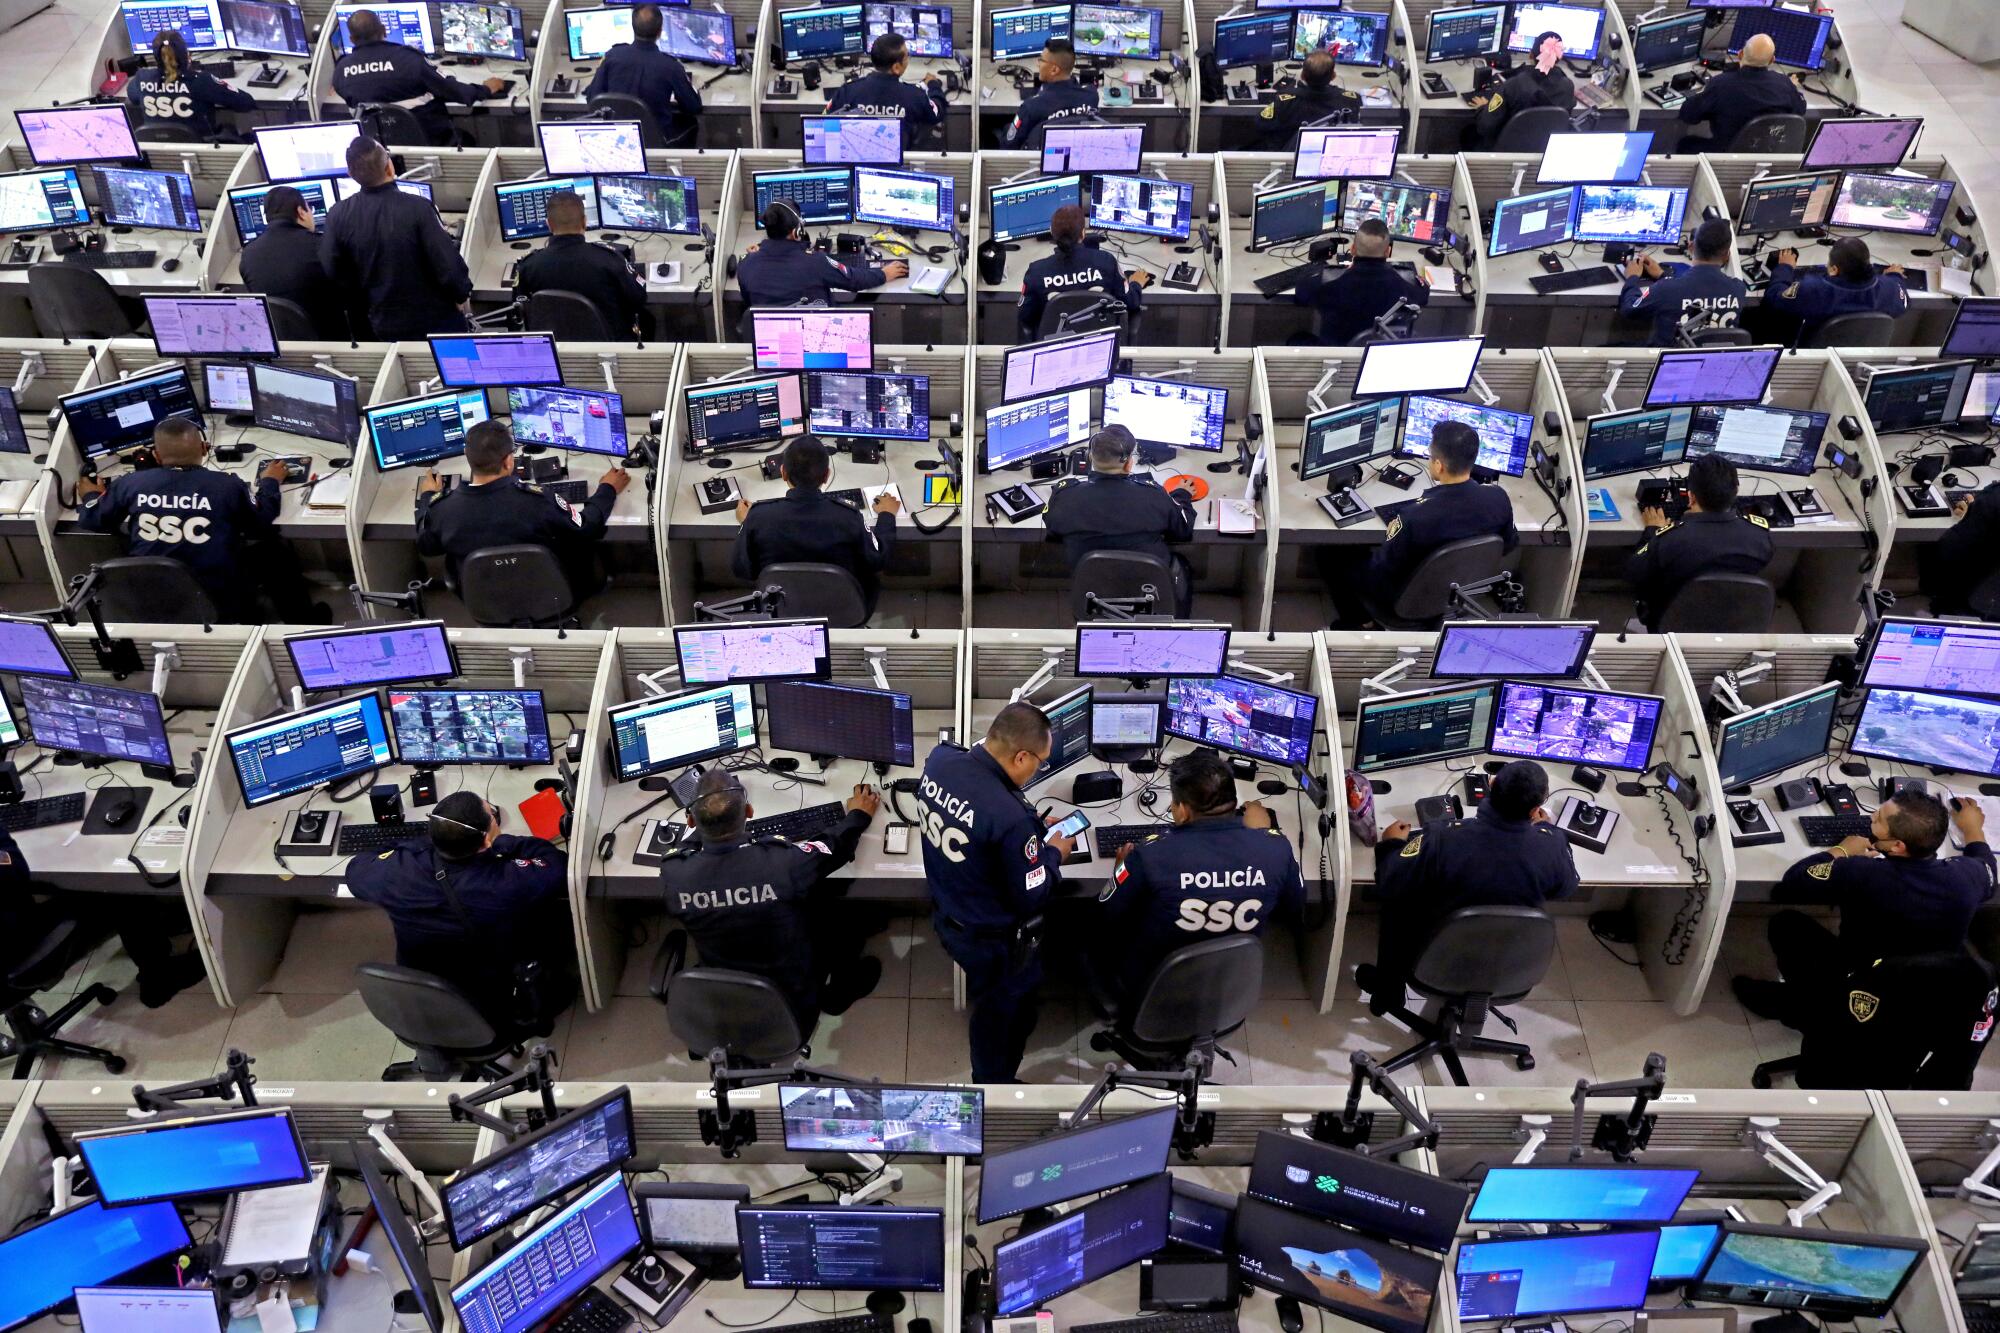 Mexico City police officers sit in rows of cubicles monitoring computer screens.